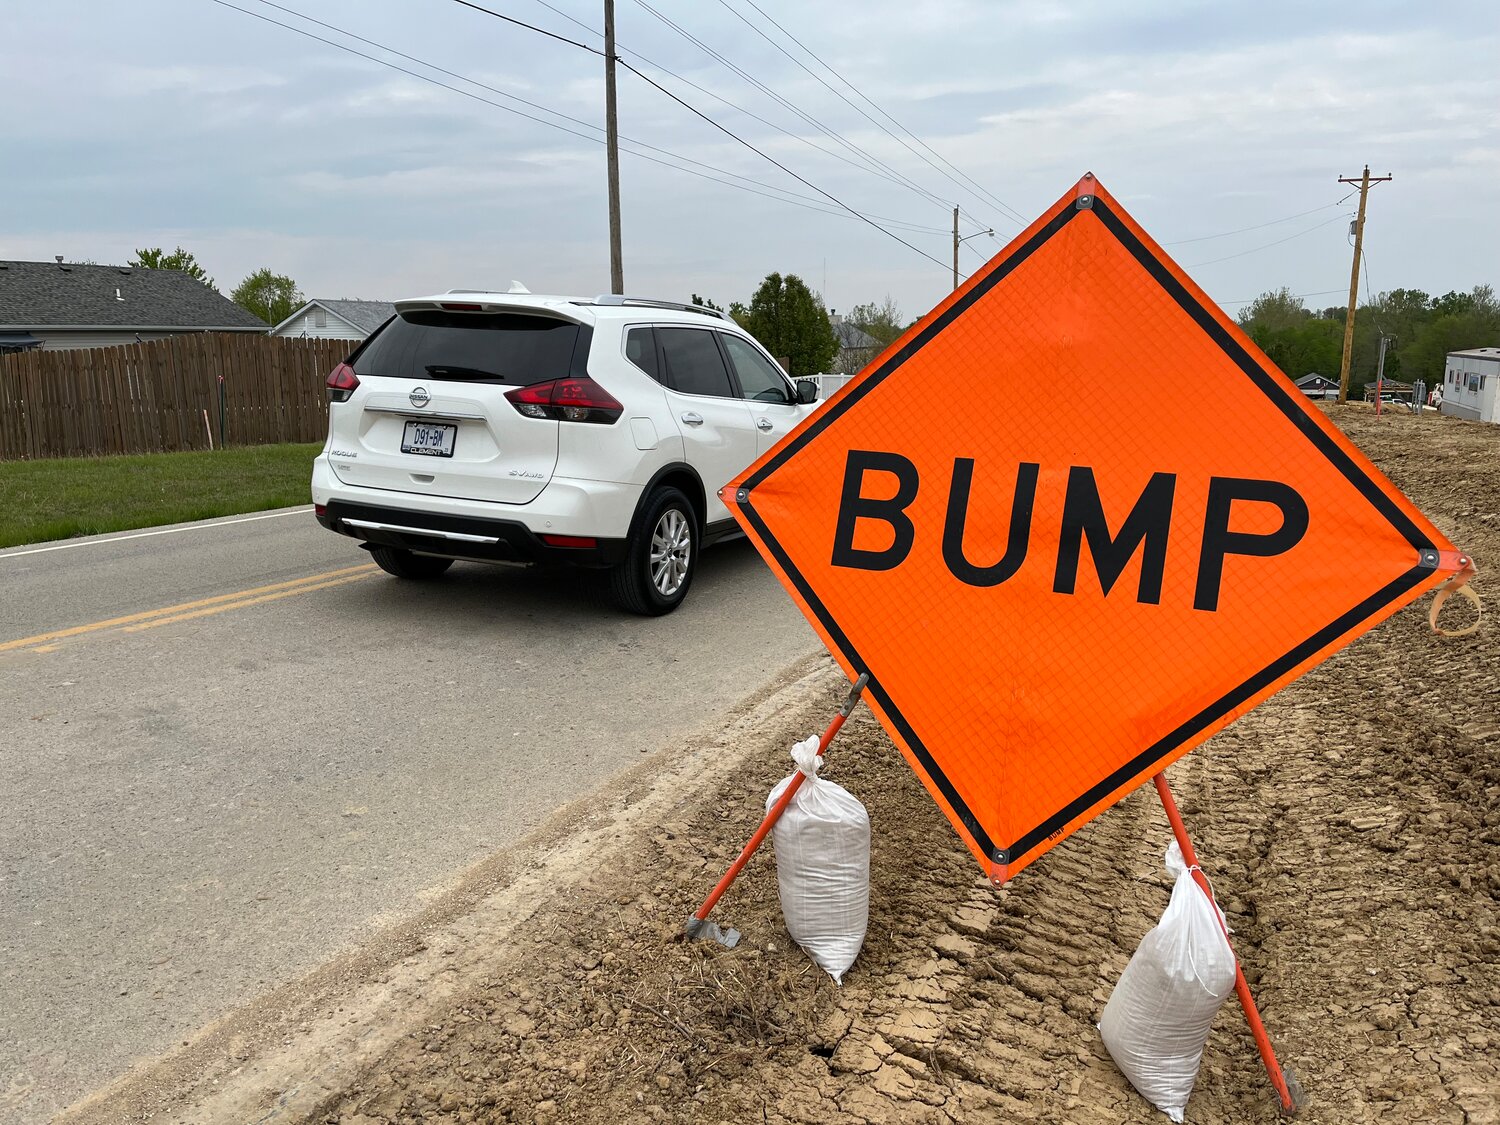 BUMP SIGNS - Large orange “bump” signs placed on both sides of Roelker Road warn drivers about the steel plates covering damage caused by trucks turning into the construction site of the new Wright City high school.